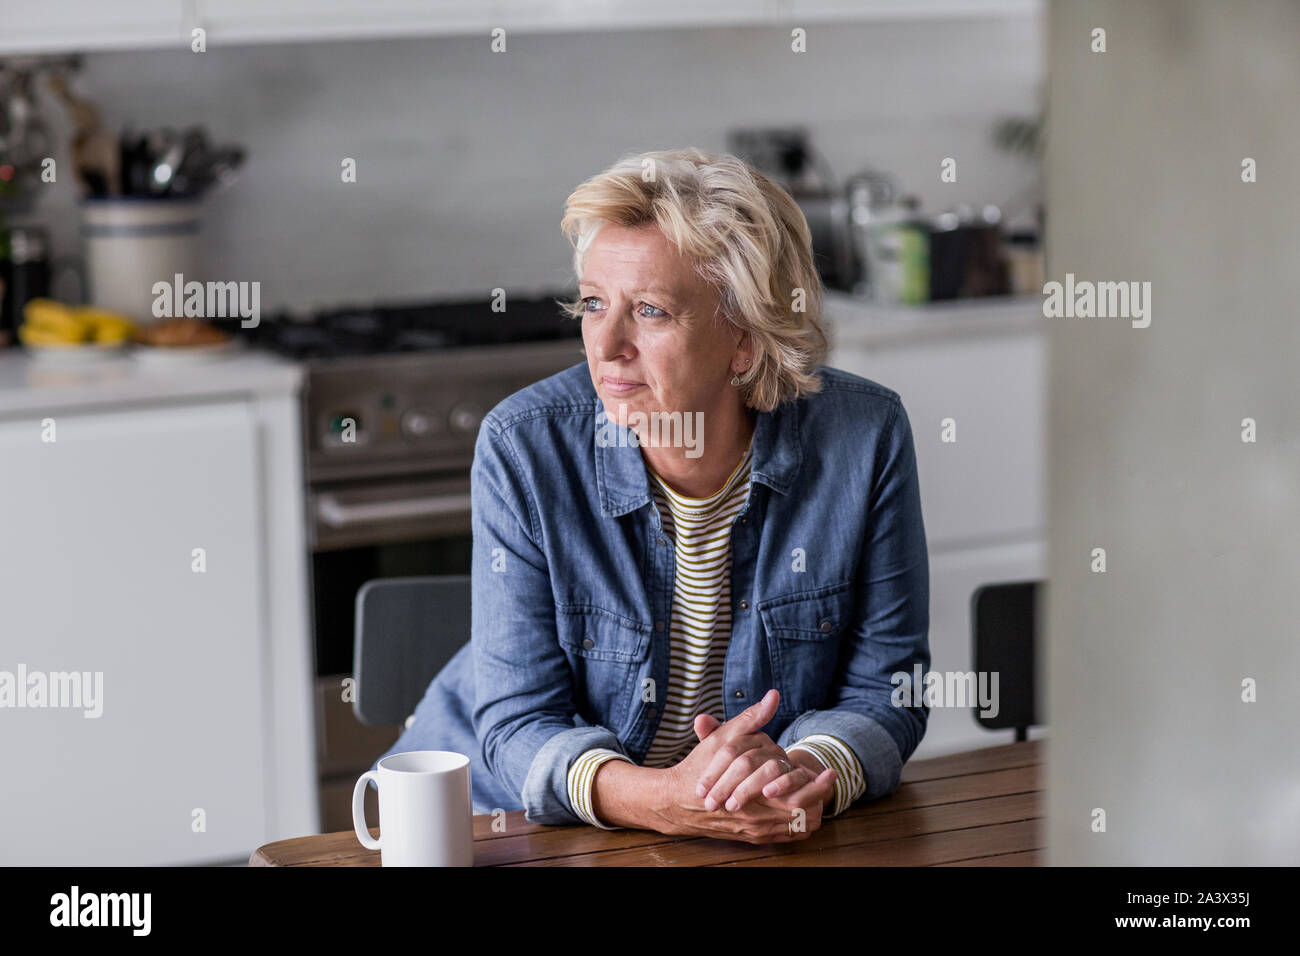 Mature adult woman looking out of window with a mug of tea Stock Photo